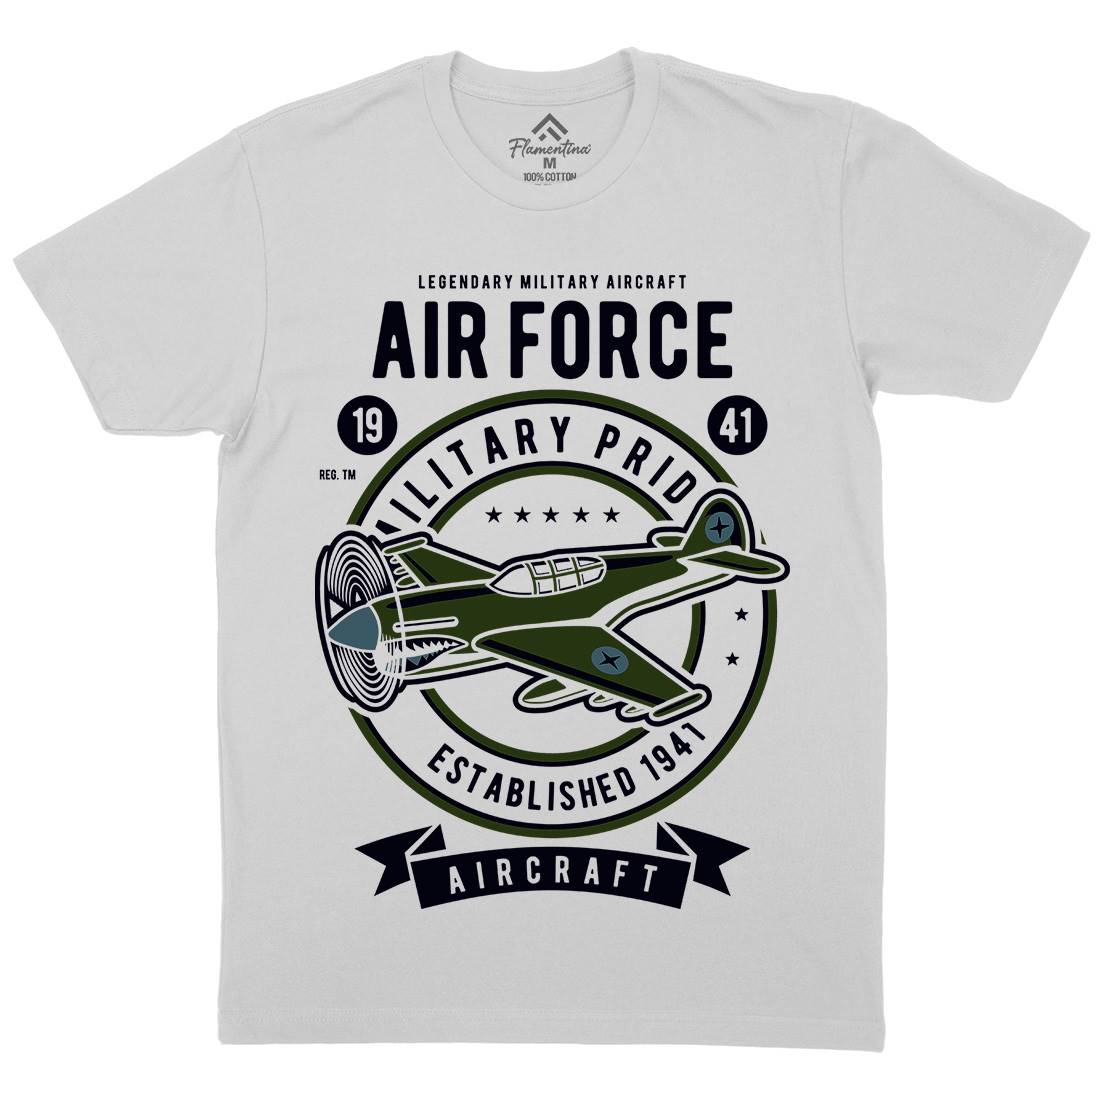 Air Force Mens Crew Neck T-Shirt Army D502